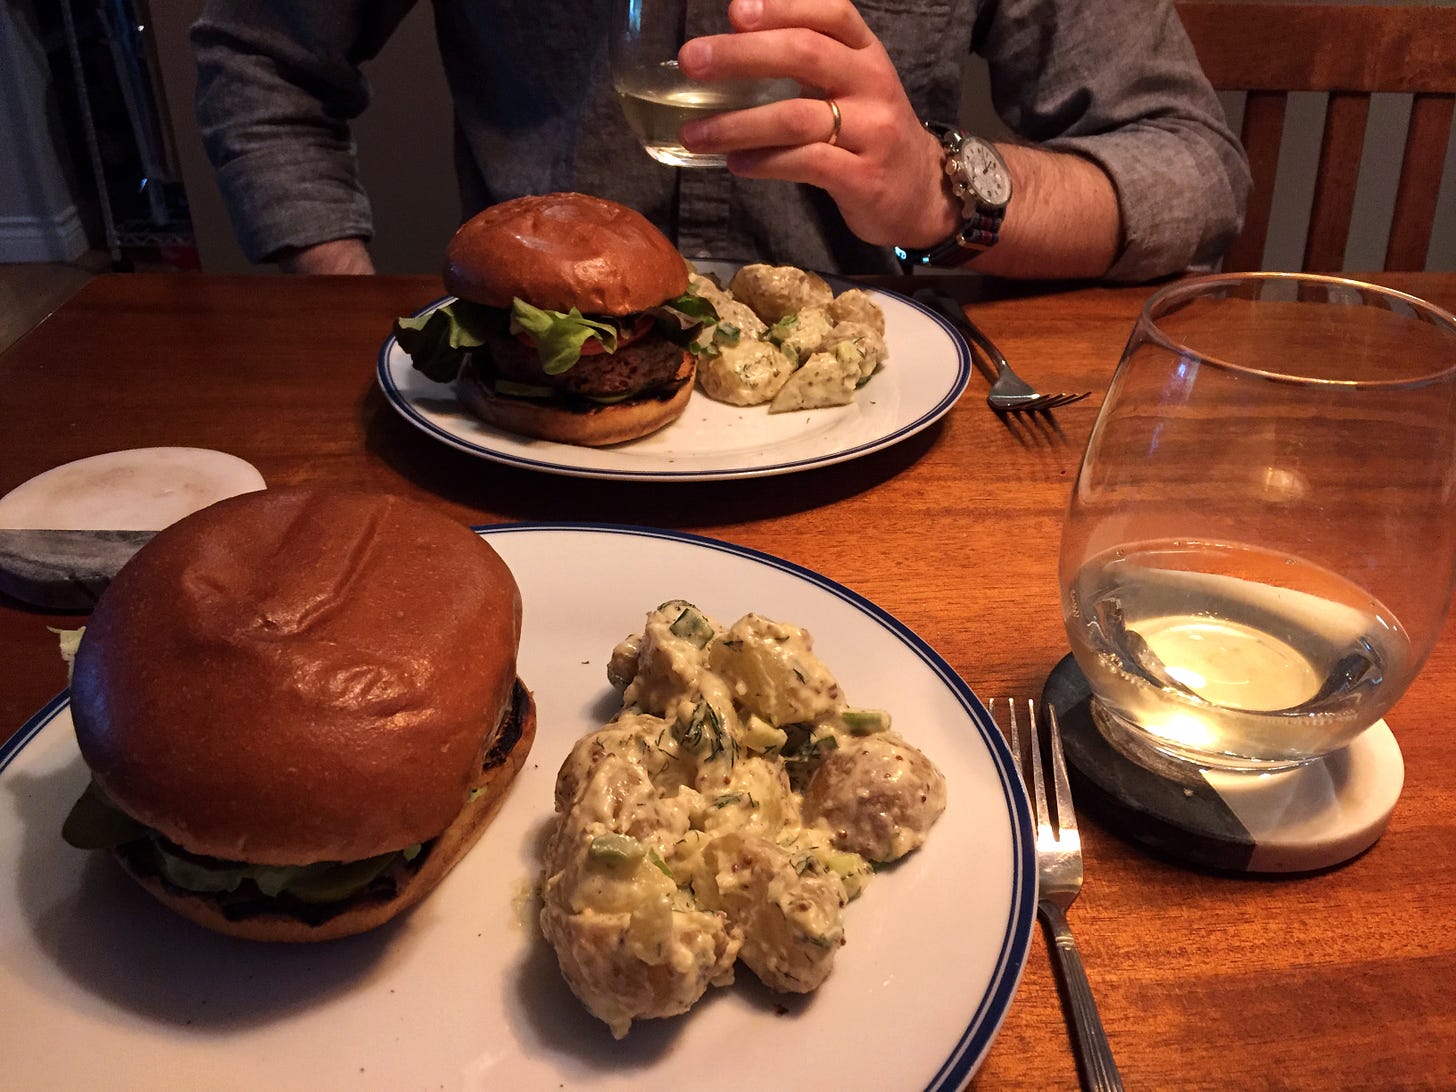 Two white plates across from each other on the table, each with a veggie burger and a serving of potato salad. The potatoes have the skins on and there is lots of dill in the dressing. A glass of white wine sits on a coaster next to the plate in the foreground.